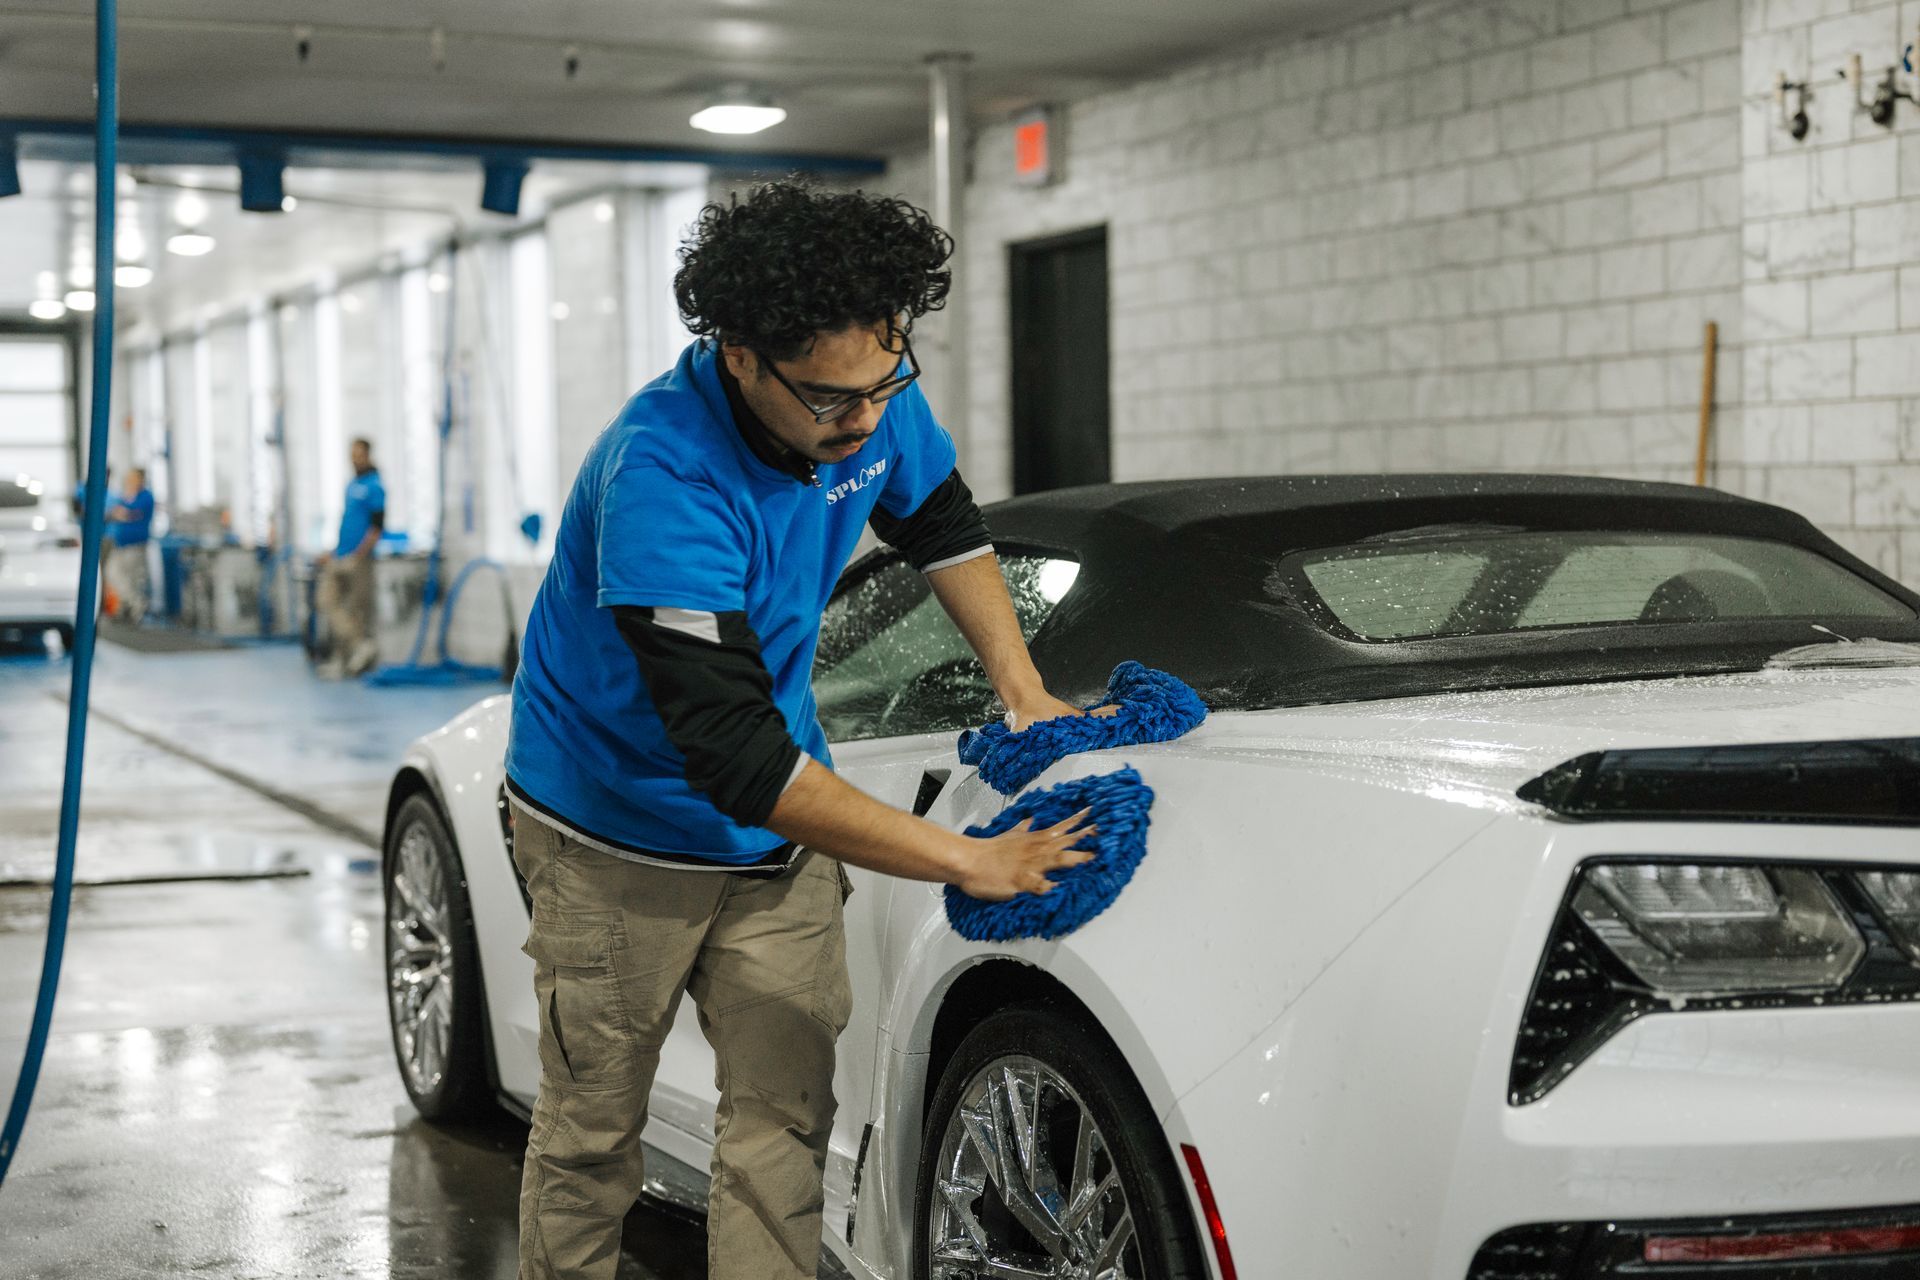 A man is cleaning a white sports car with a blue cloth.